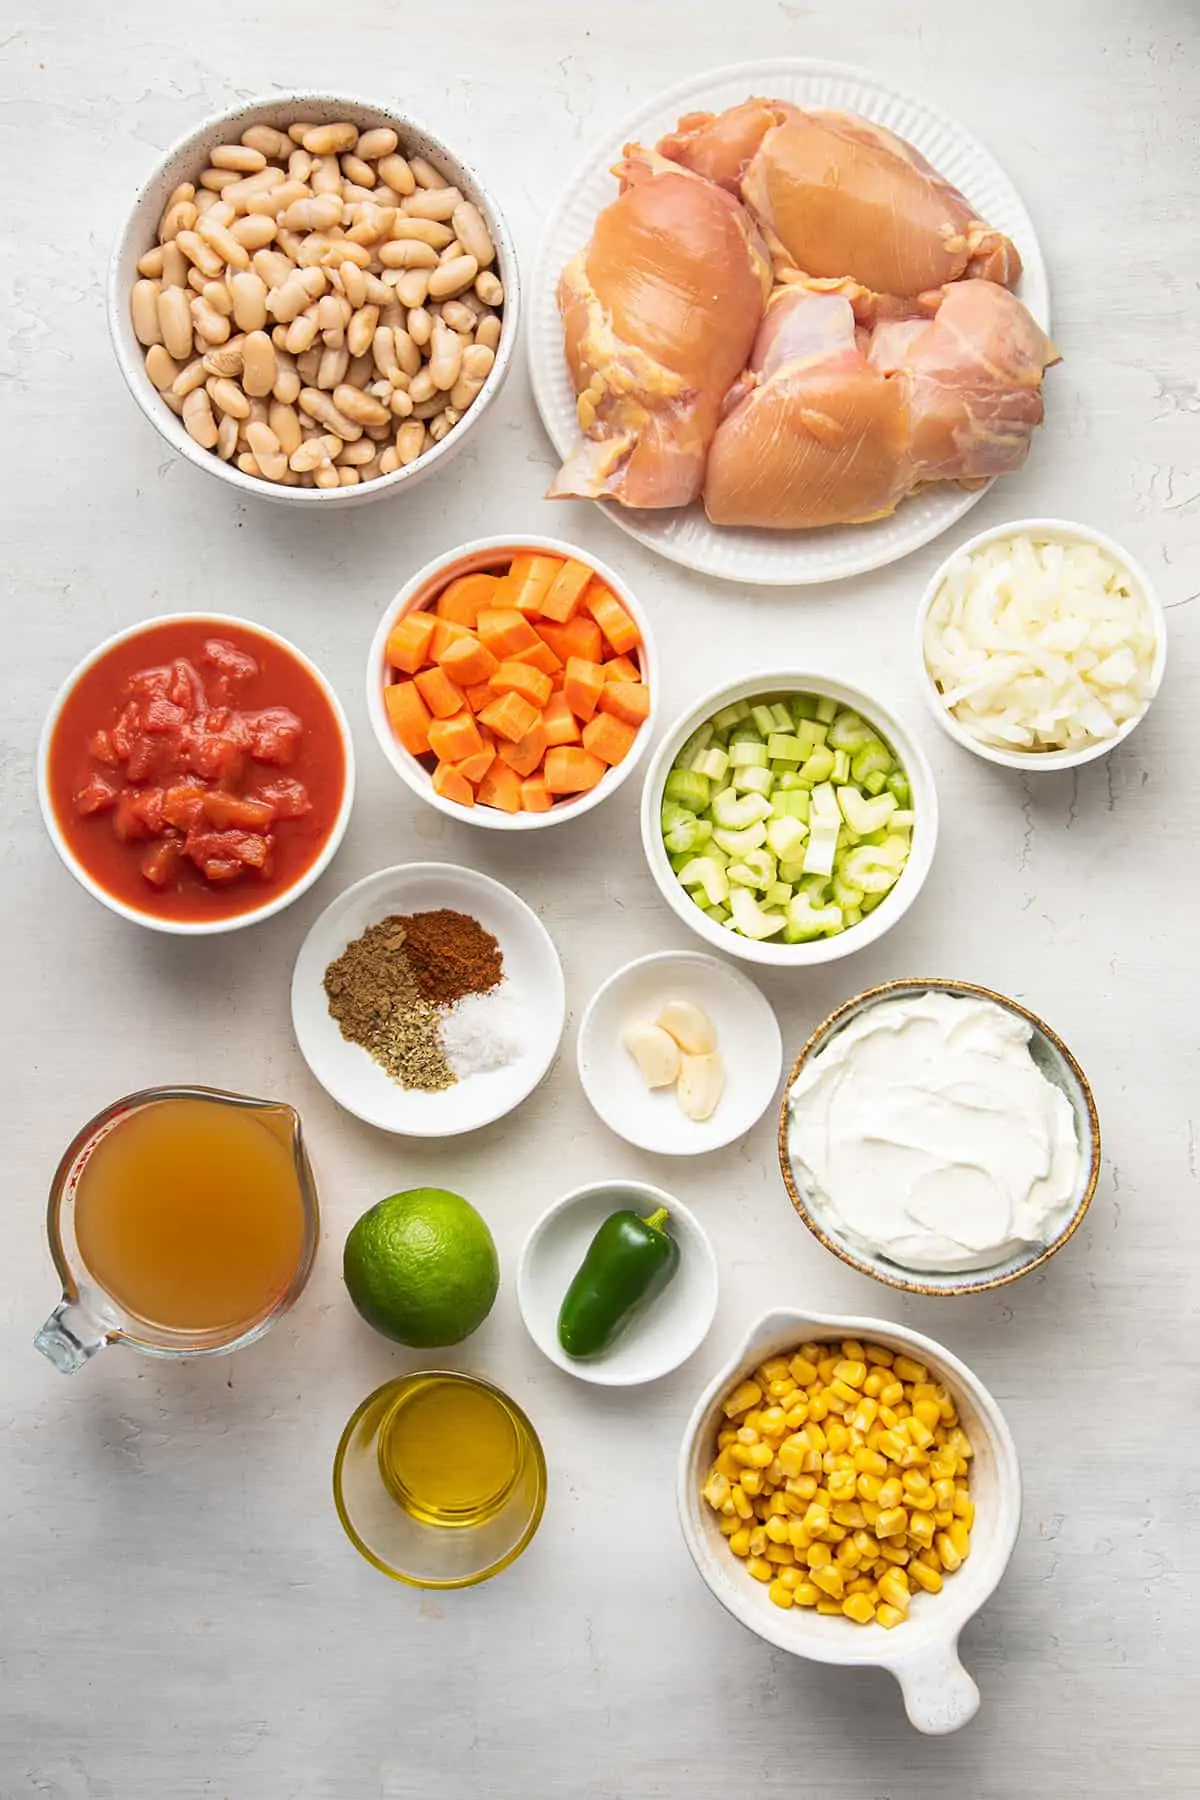 Overhead picture of the ingredients for white chicken chili: beans, chicken thighs, canned tomatoes, carrots, celery, onion, spices, garlic, sour cream, vegetable broth, a lime, a jalapeño, oil, and corn